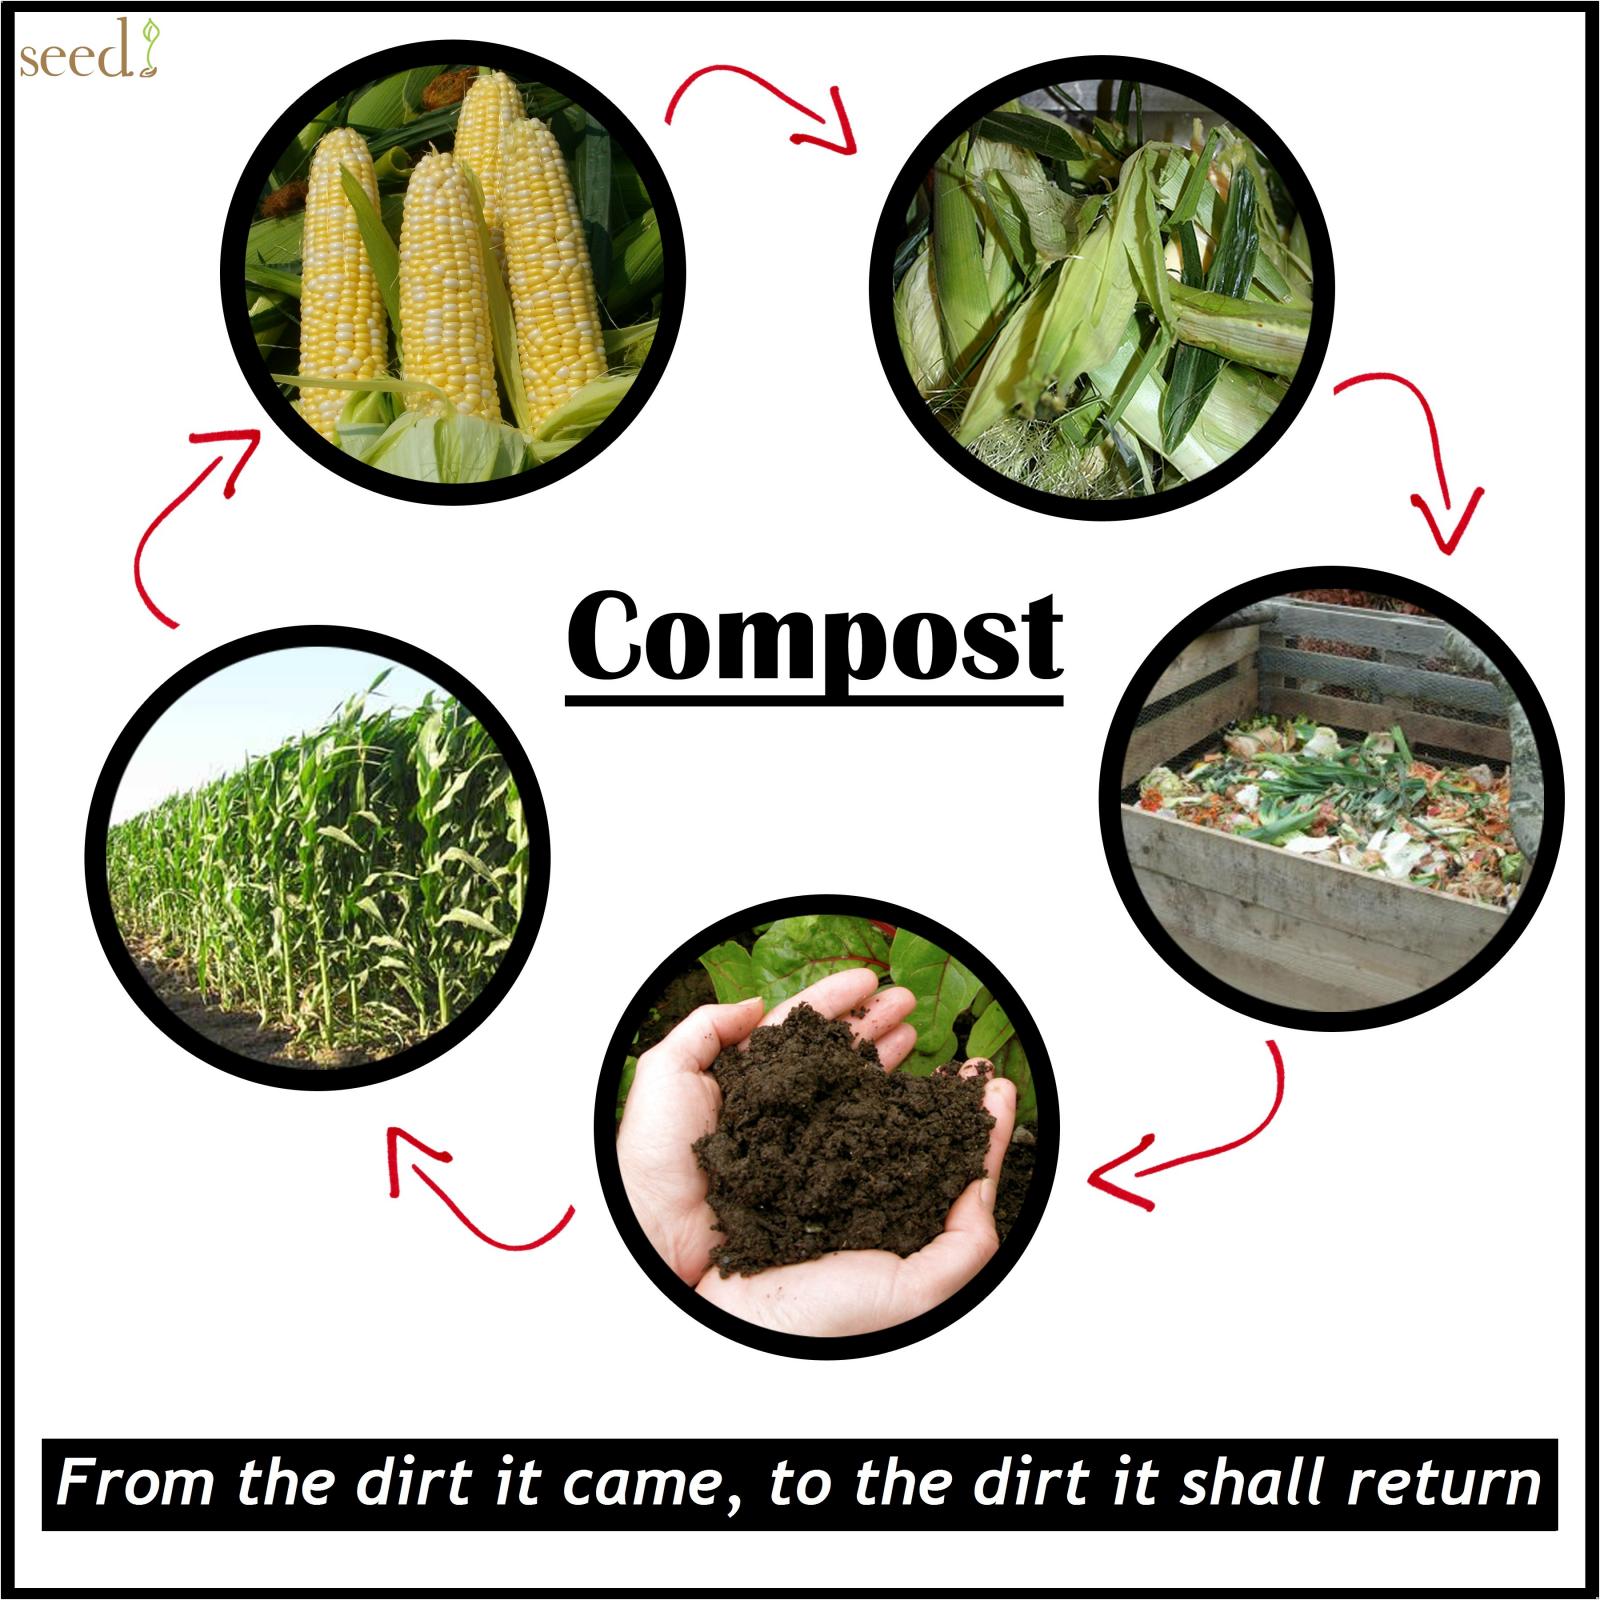 Compost returns nutrients to the dirt for planting vegetables.